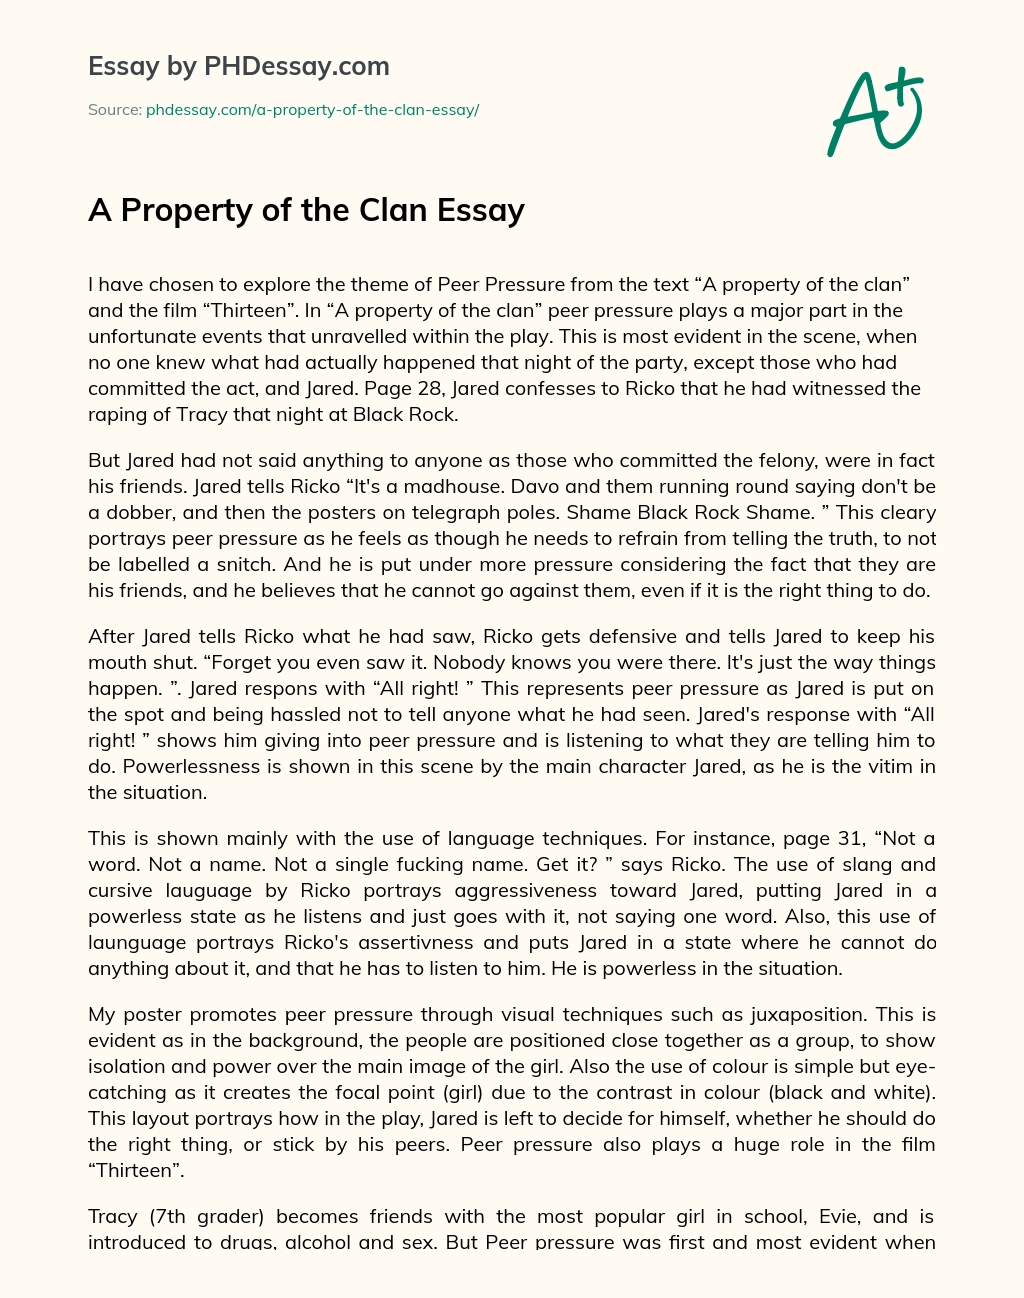 A Property of the Clan Essay essay